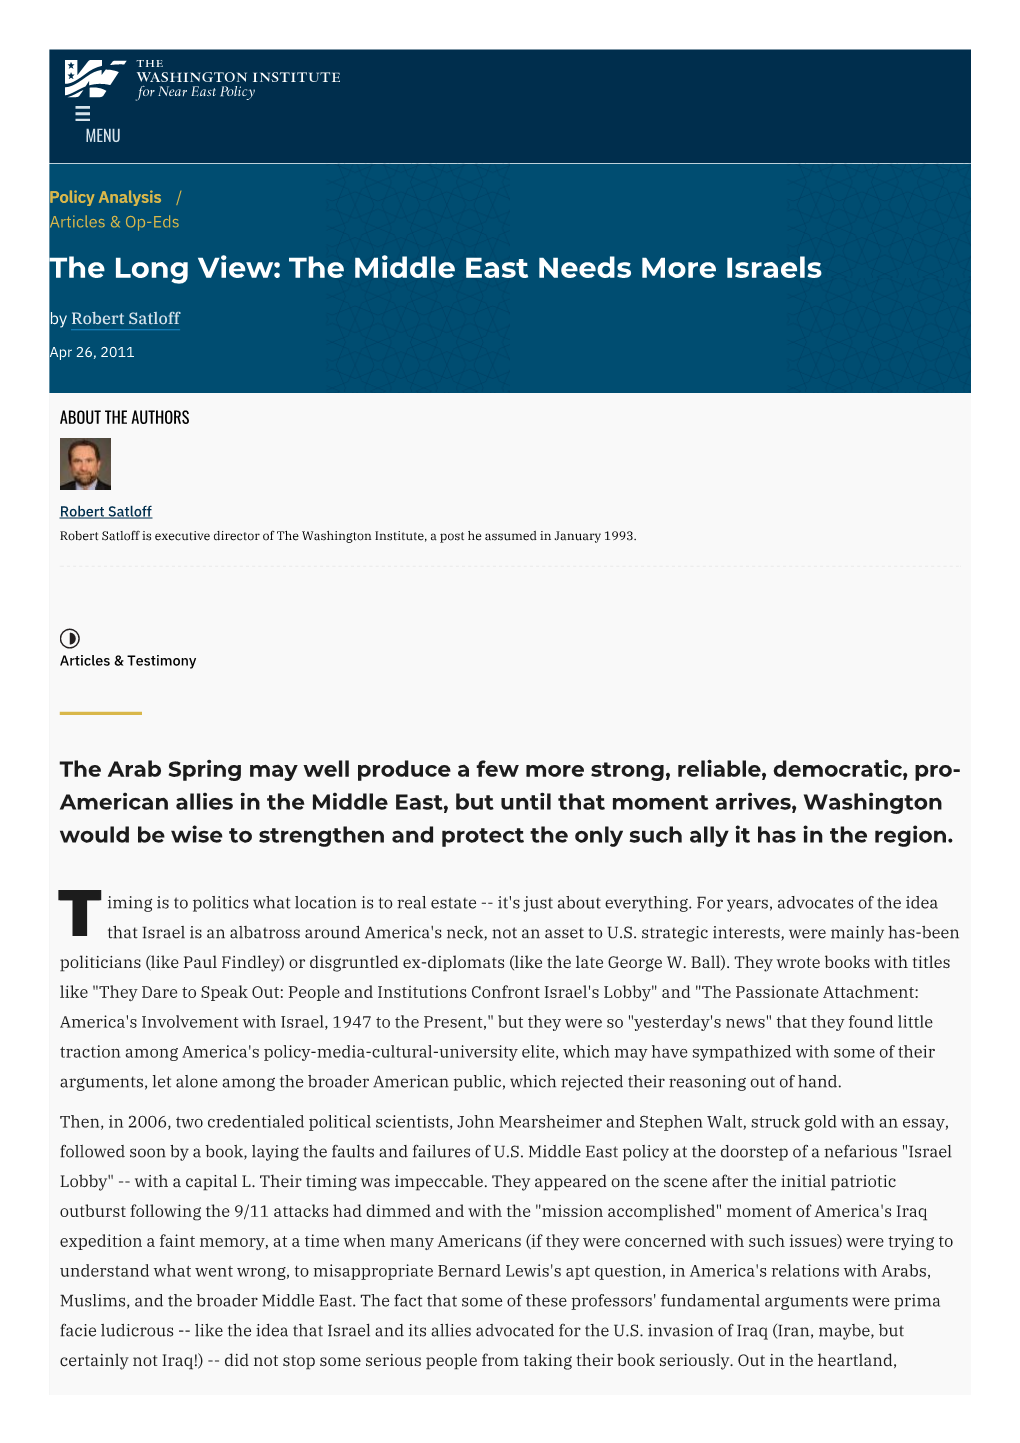 The Long View: the Middle East Needs More Israels | The